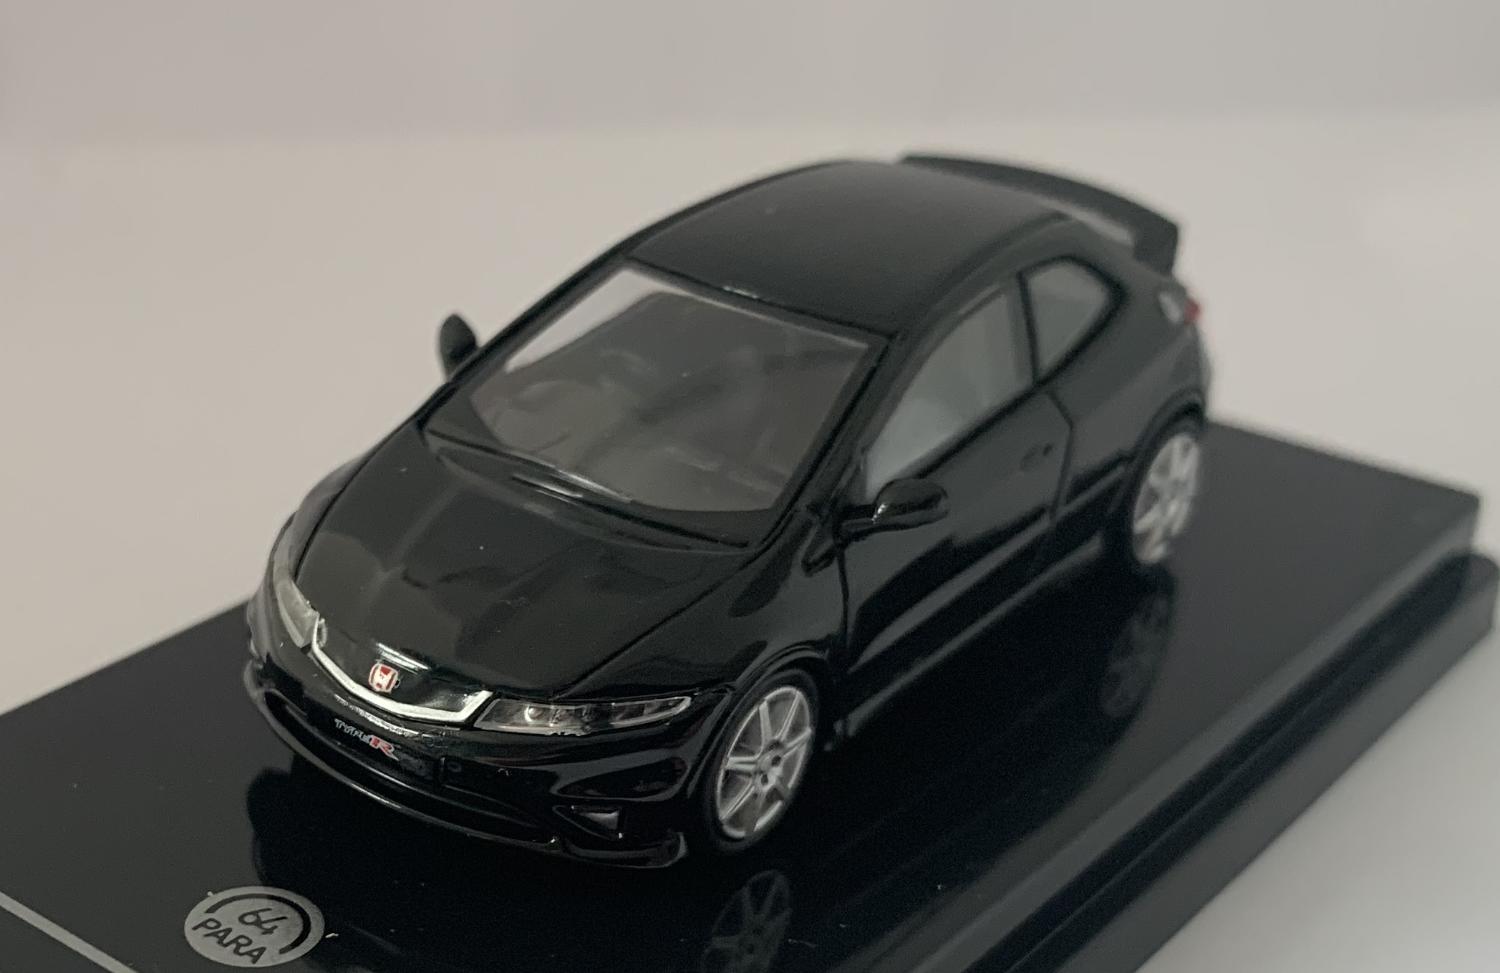 2007 Honda Civic Type R FN2 Euro in nighthawk black 1:64 scale model from Paragon Models